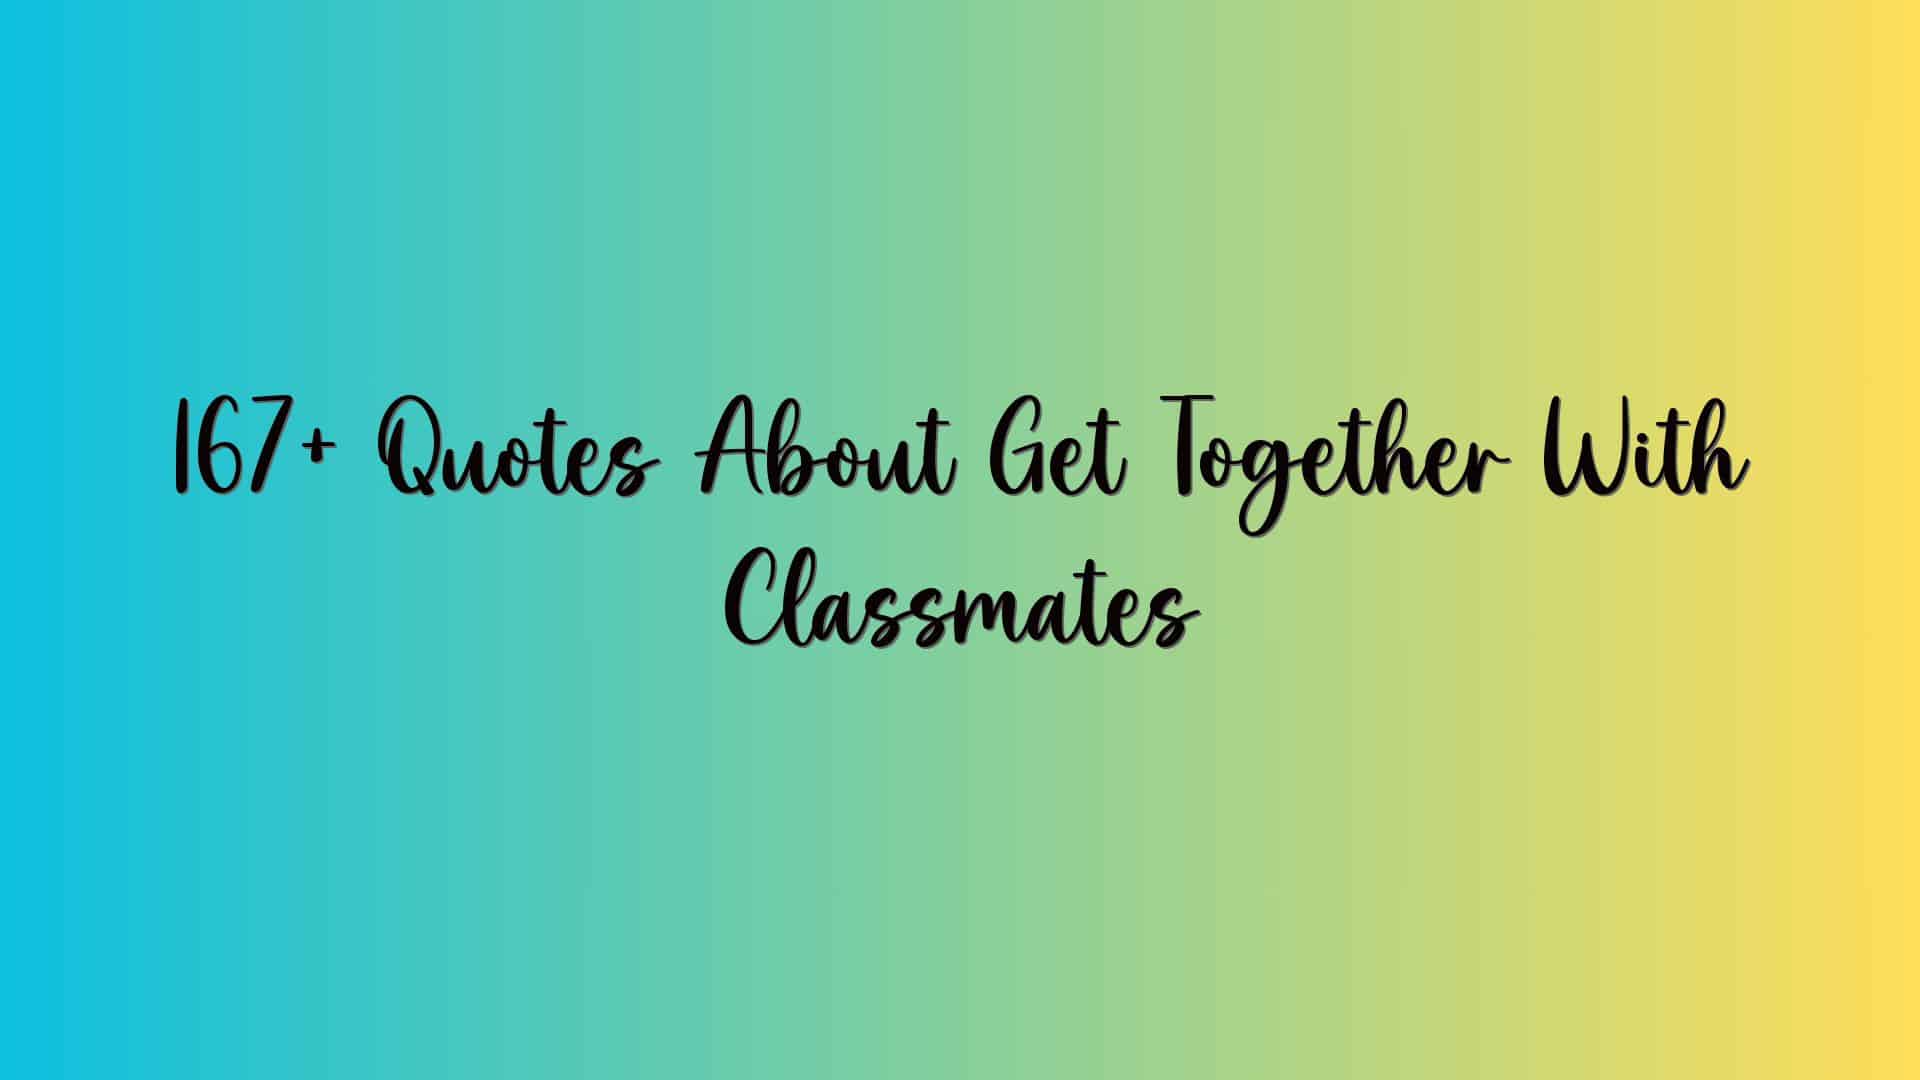 167+ Quotes About Get Together With Classmates